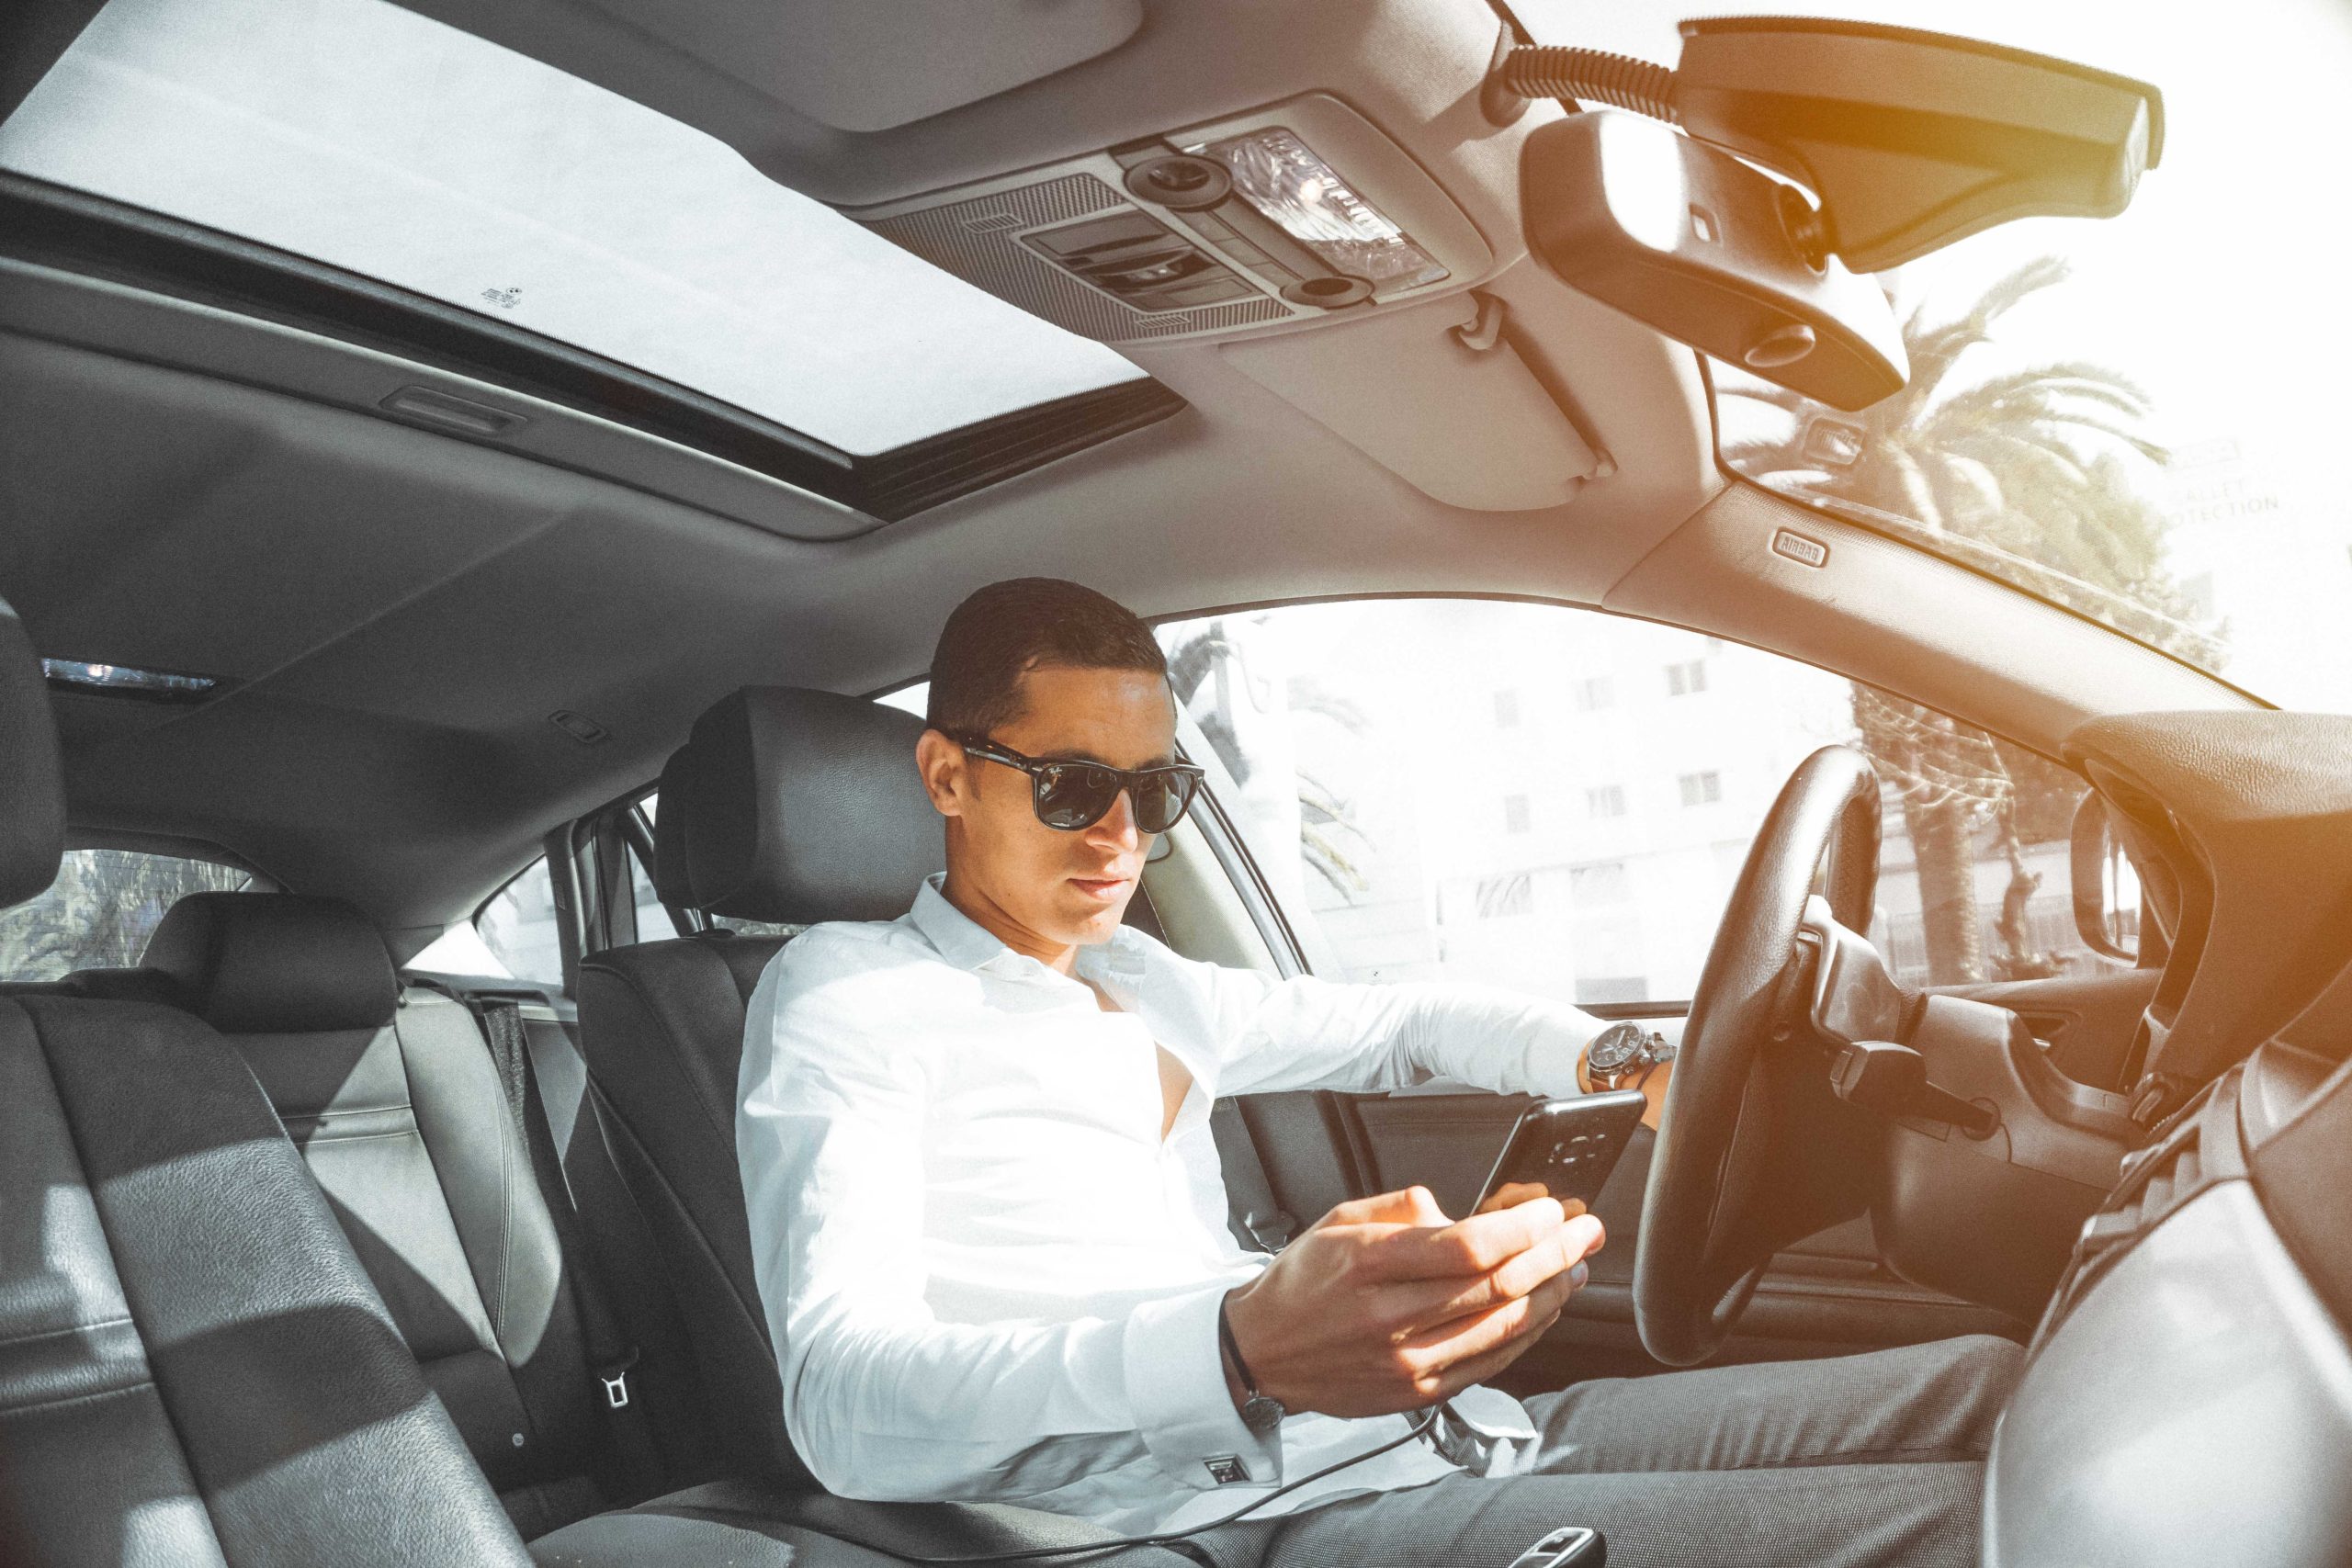 Man wearing sunglasses checking his phone in his car